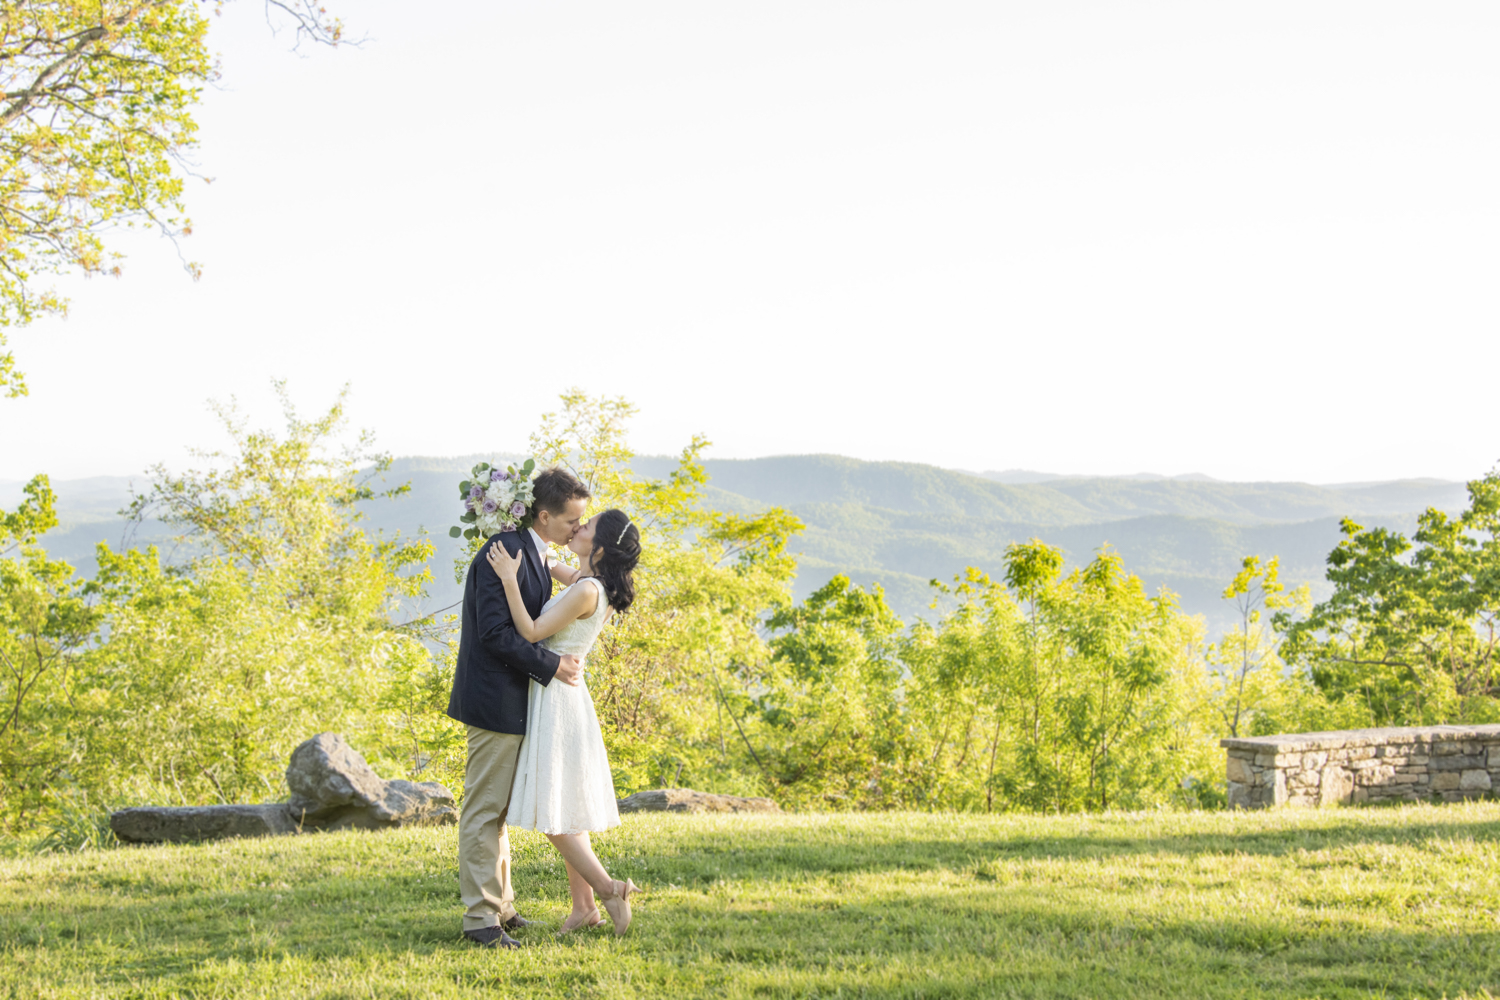 Couple kissing at wedding with mountain views